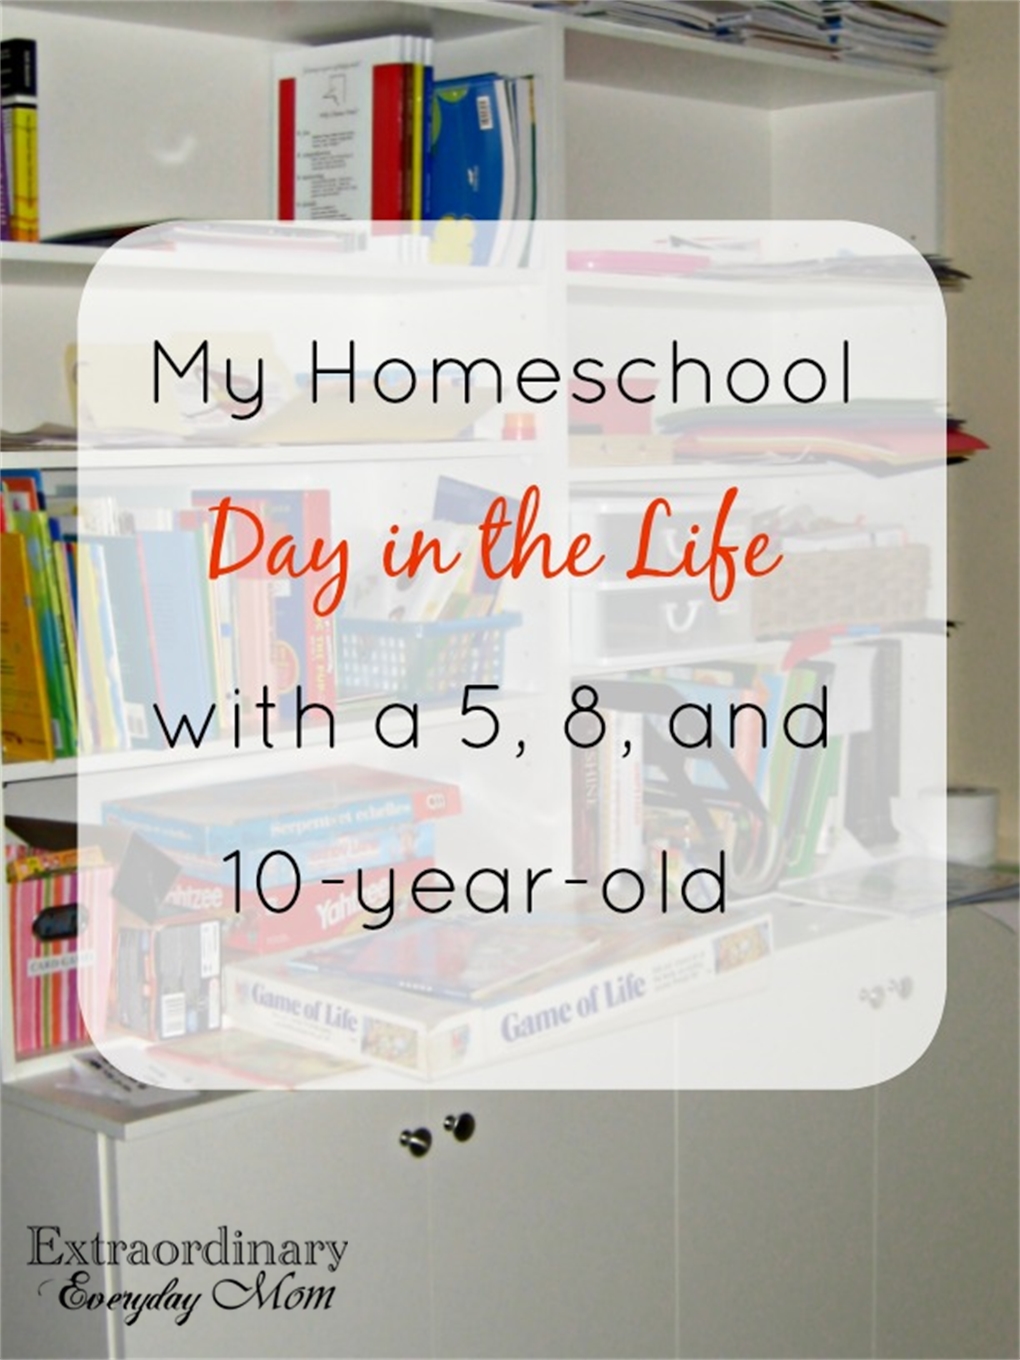 My Homeschool Day in the Life with a 5, 8, and 10-year-old